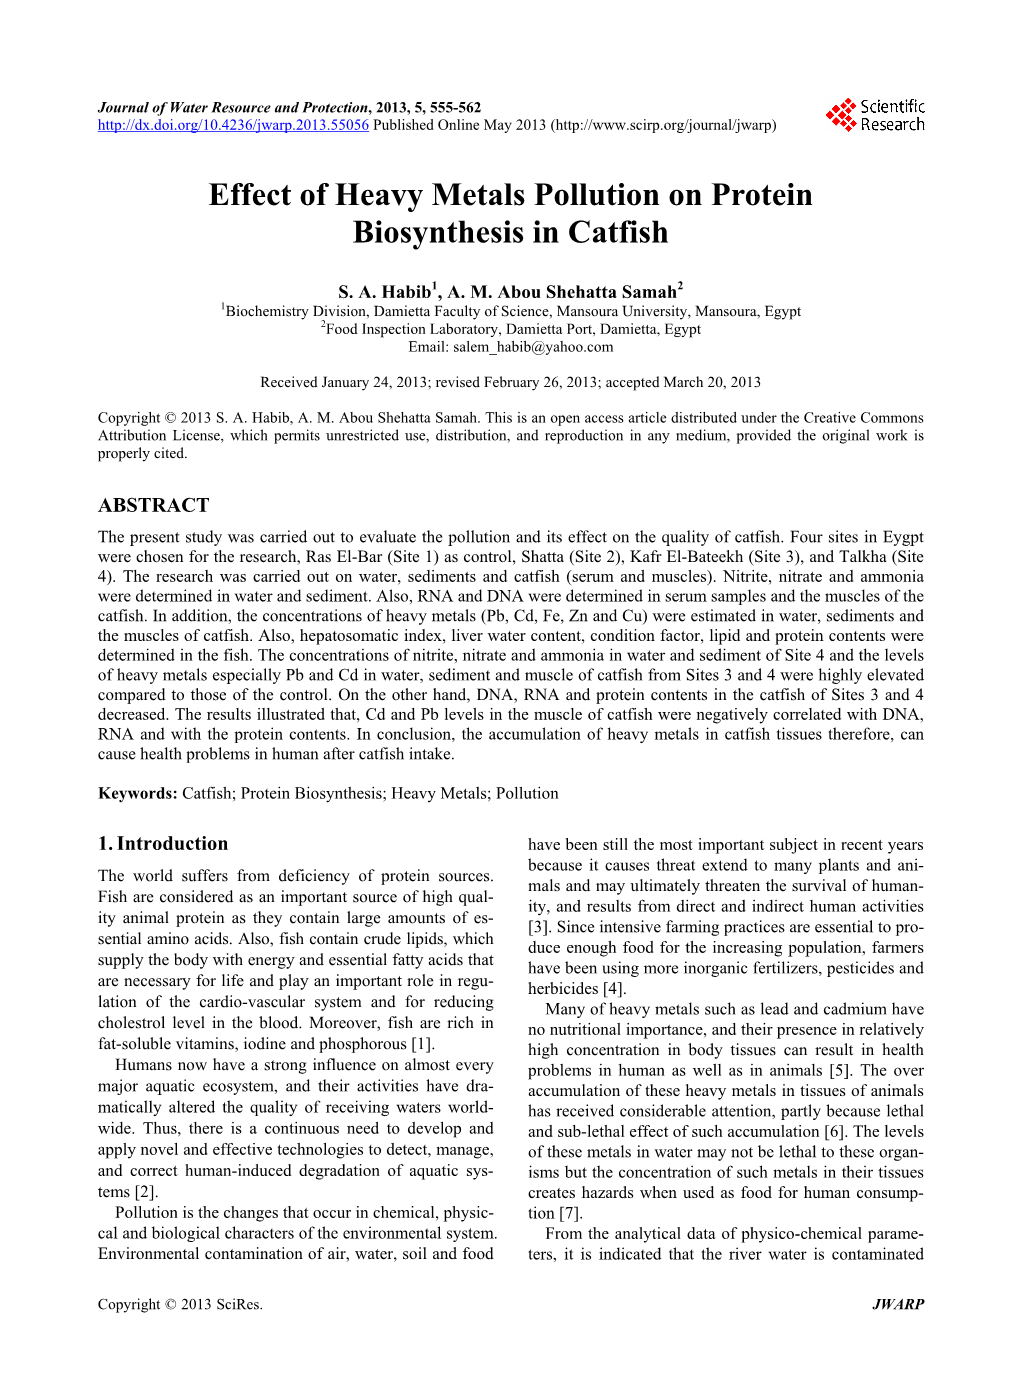 Effect of Heavy Metals Pollution on Protein Biosynthesis in Catfish